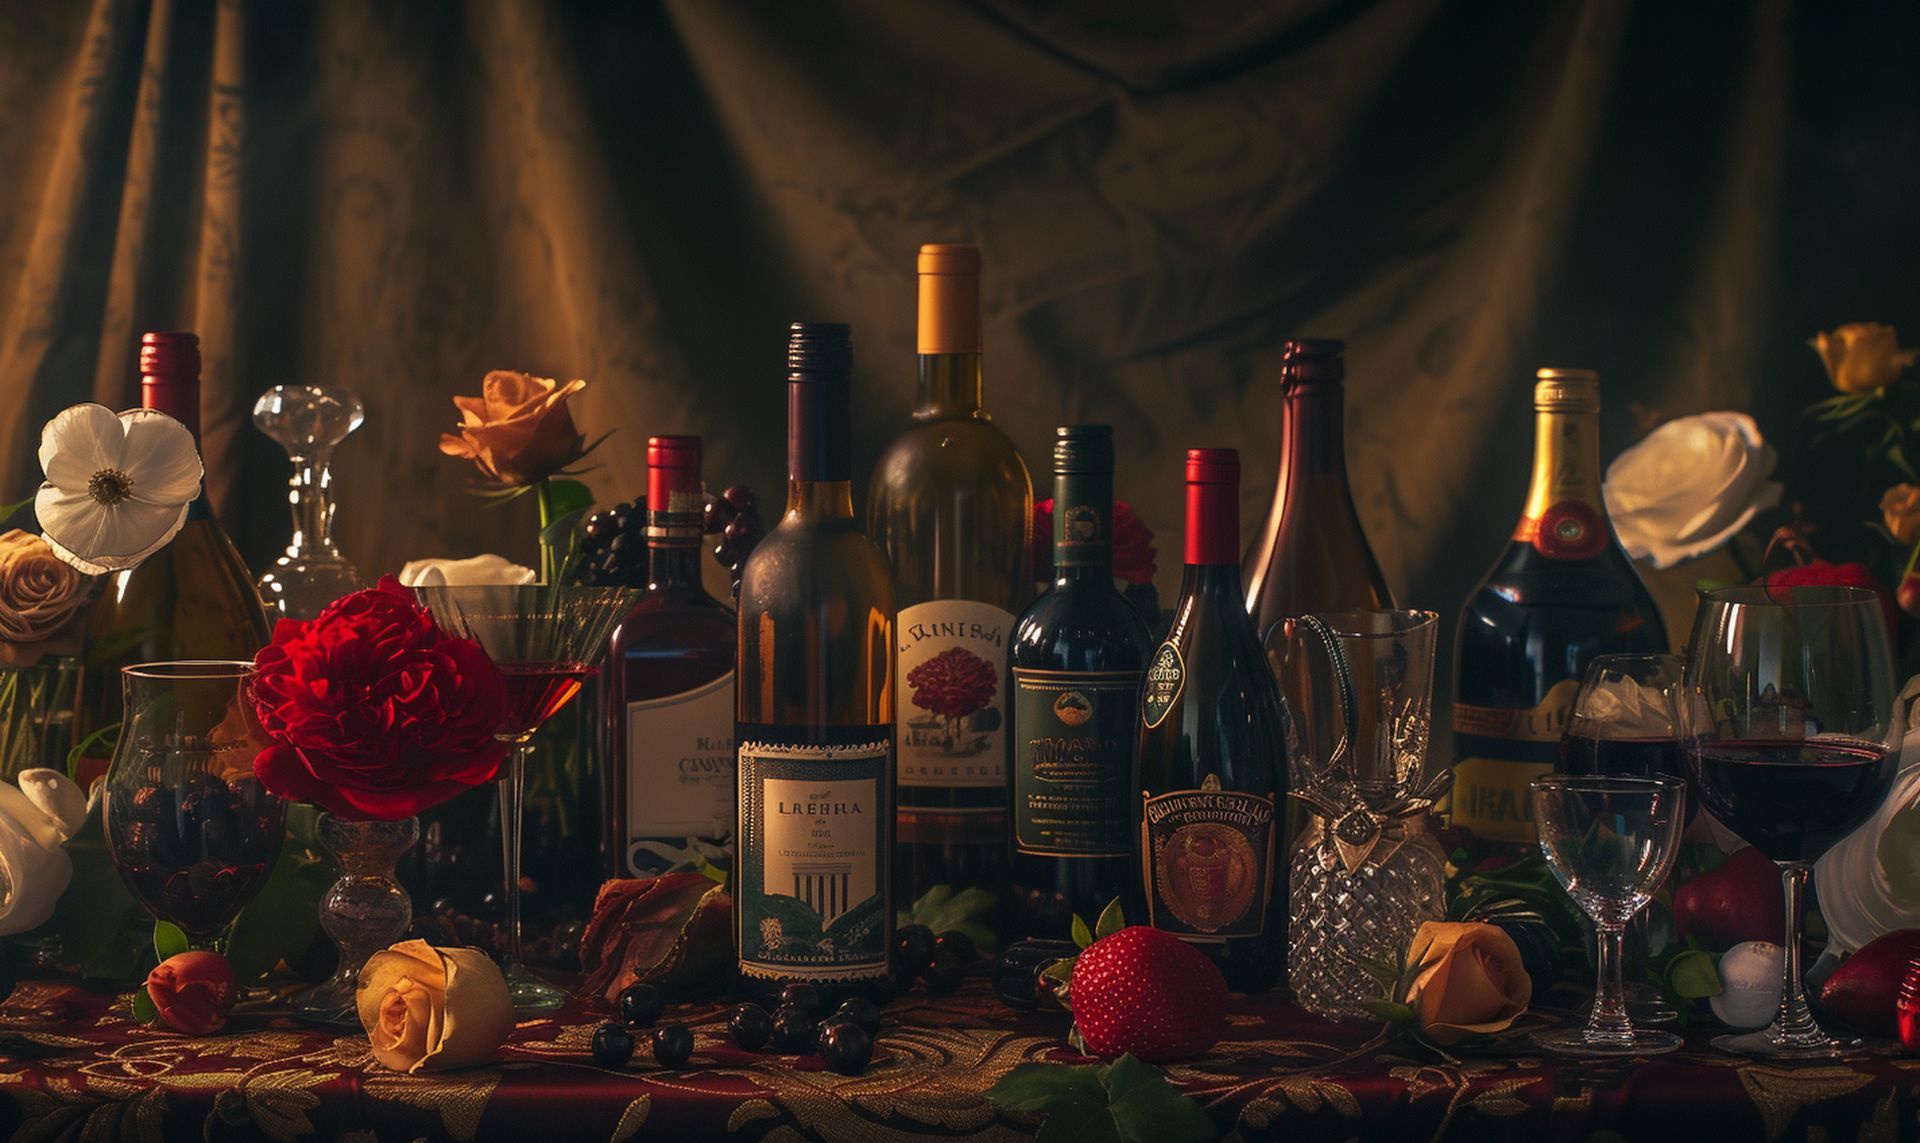 An array of fine wine bottles, each representing a type ideal for Valentine's Day celebration, set against an exotic, professional backdrop.